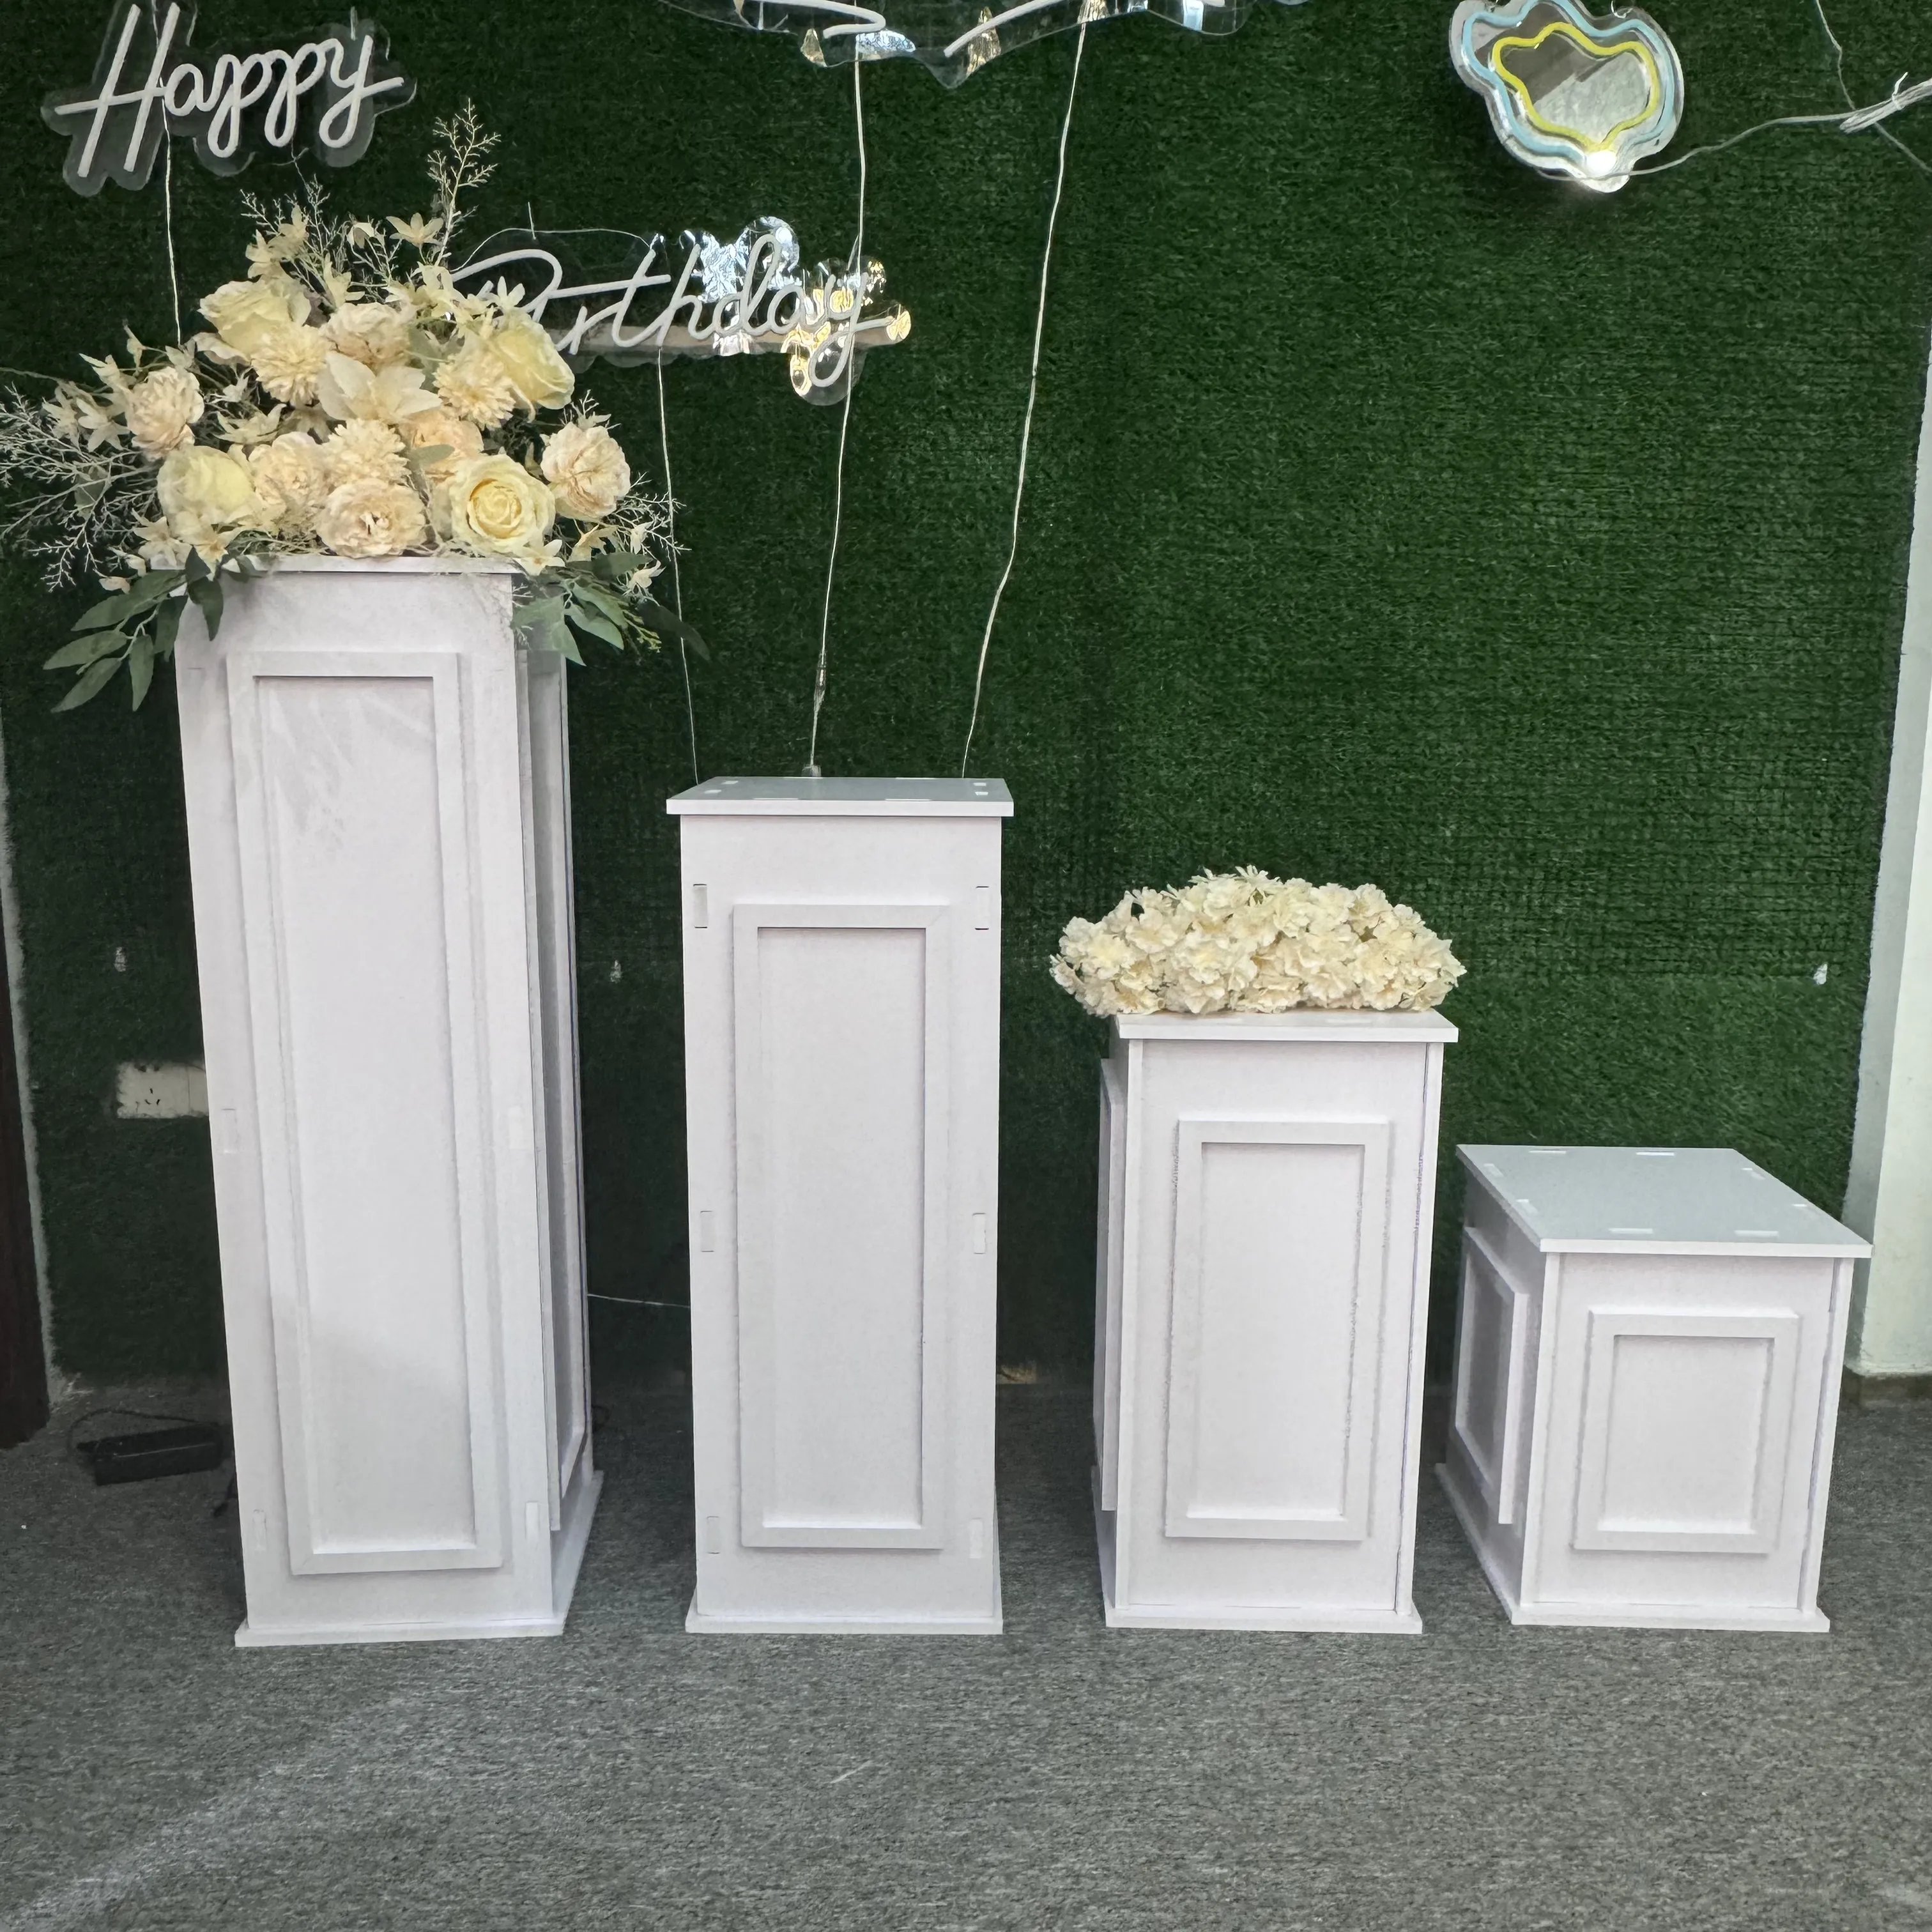 Hot Selling PVC Carved Roman Columns Pillar Party Road Lead Stand Wedding Plinth For Wedding Decoration